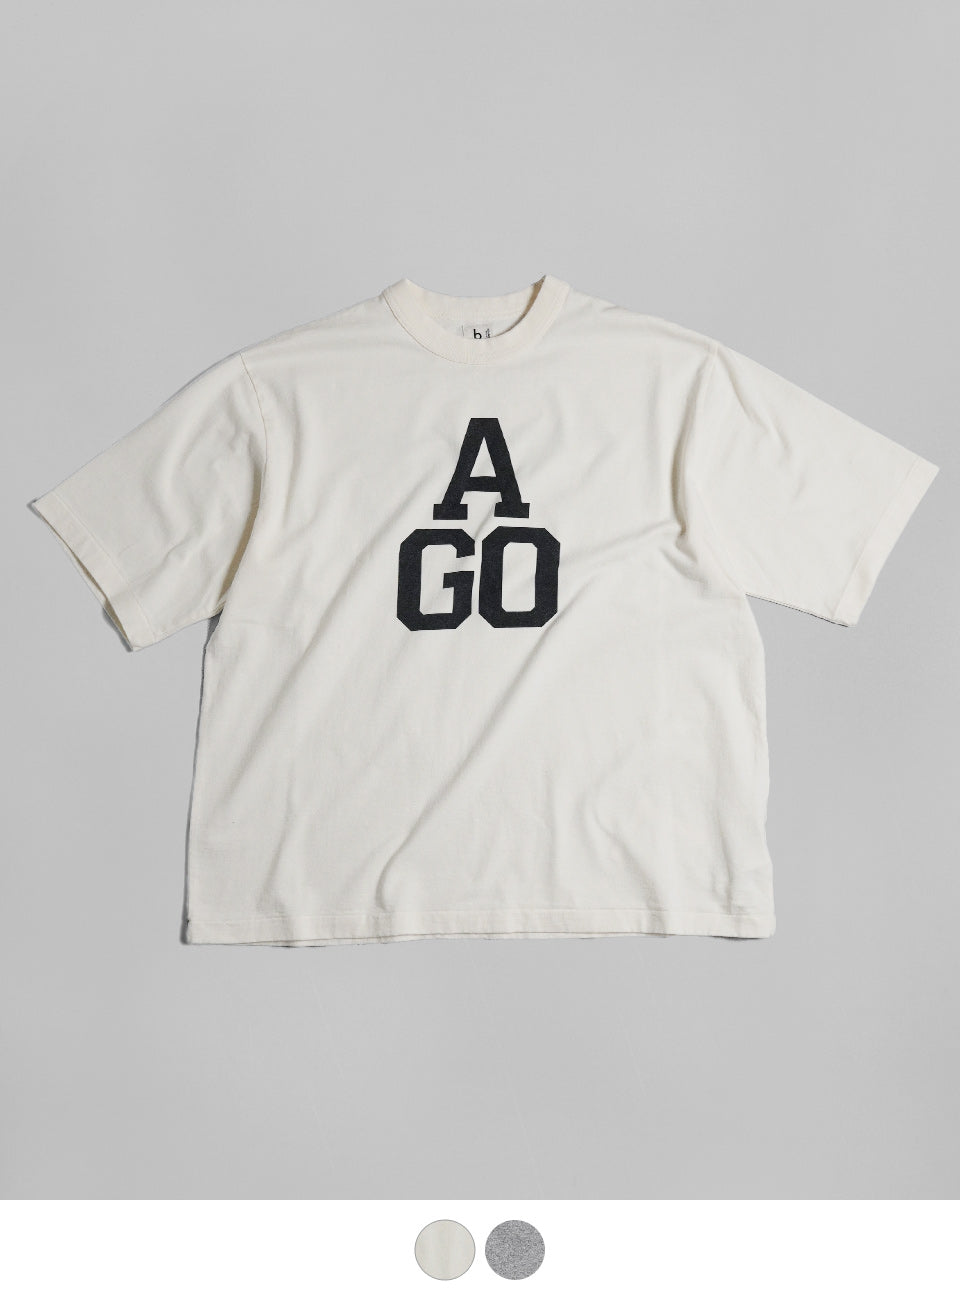 blurhms ROOTSTOCK ブラームス ルーツストック プリント Tシャツ ワイド CHIC-AGO 88/12 Print Tee WIDE【送料無料】正規取扱店[★]